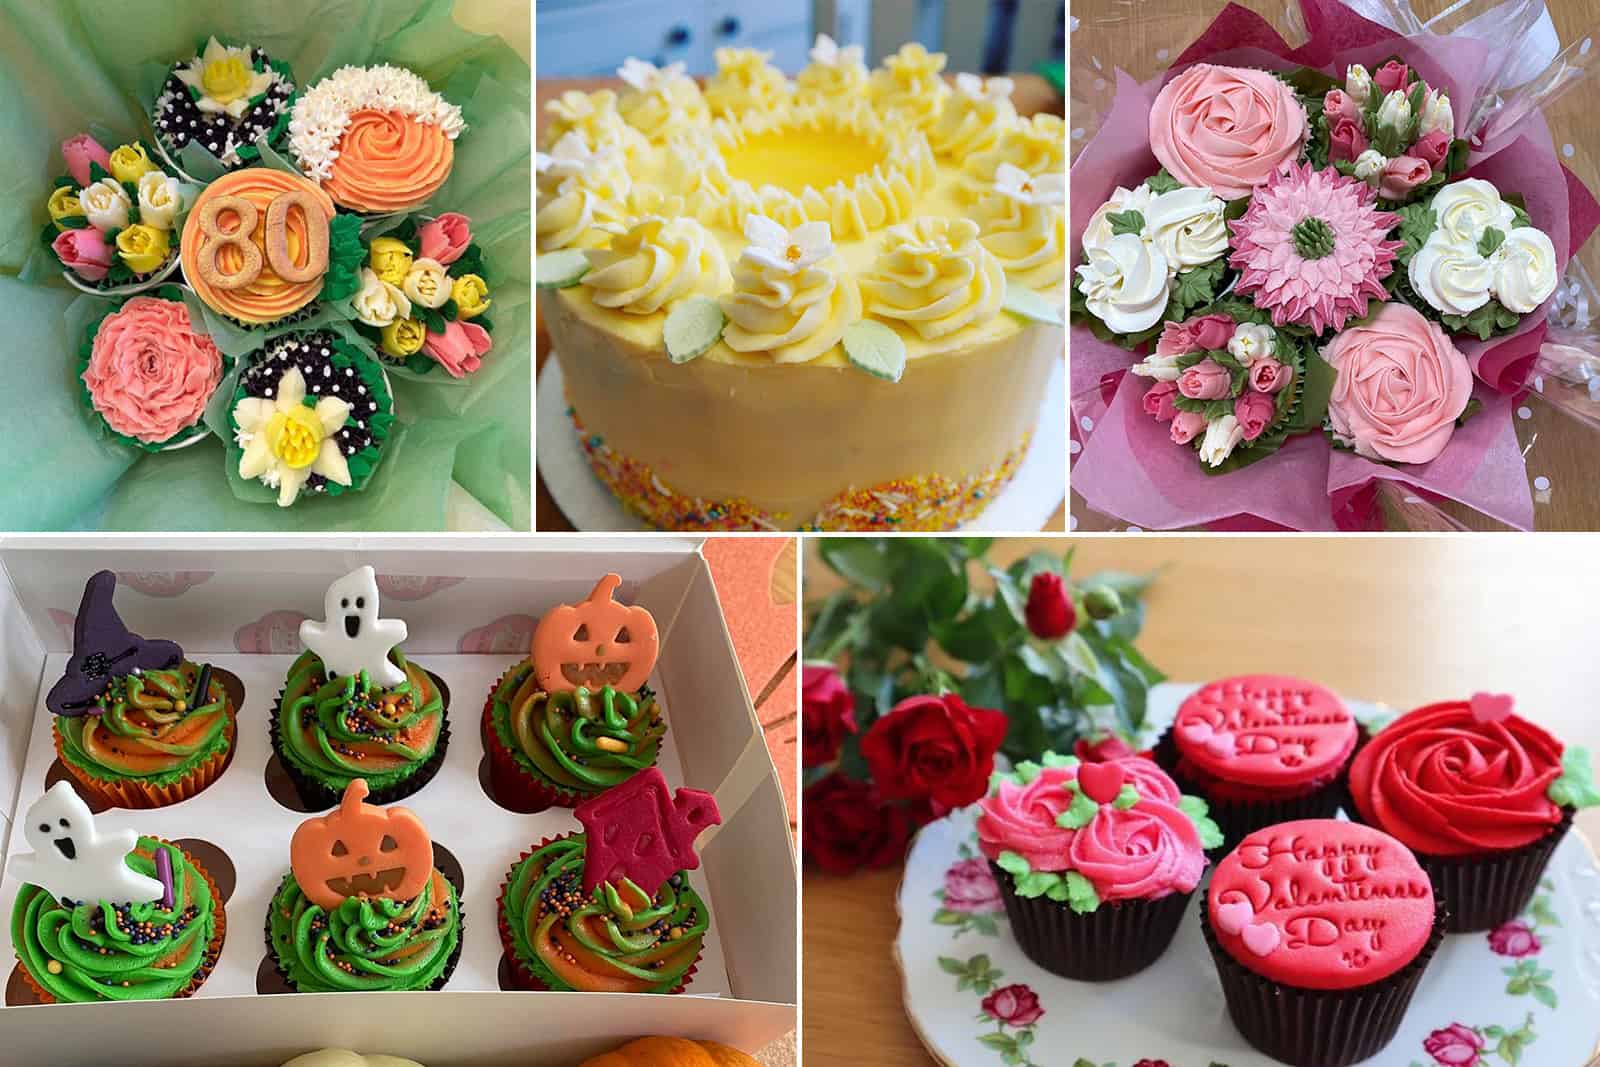 decorated and themed cakes and cupcakes